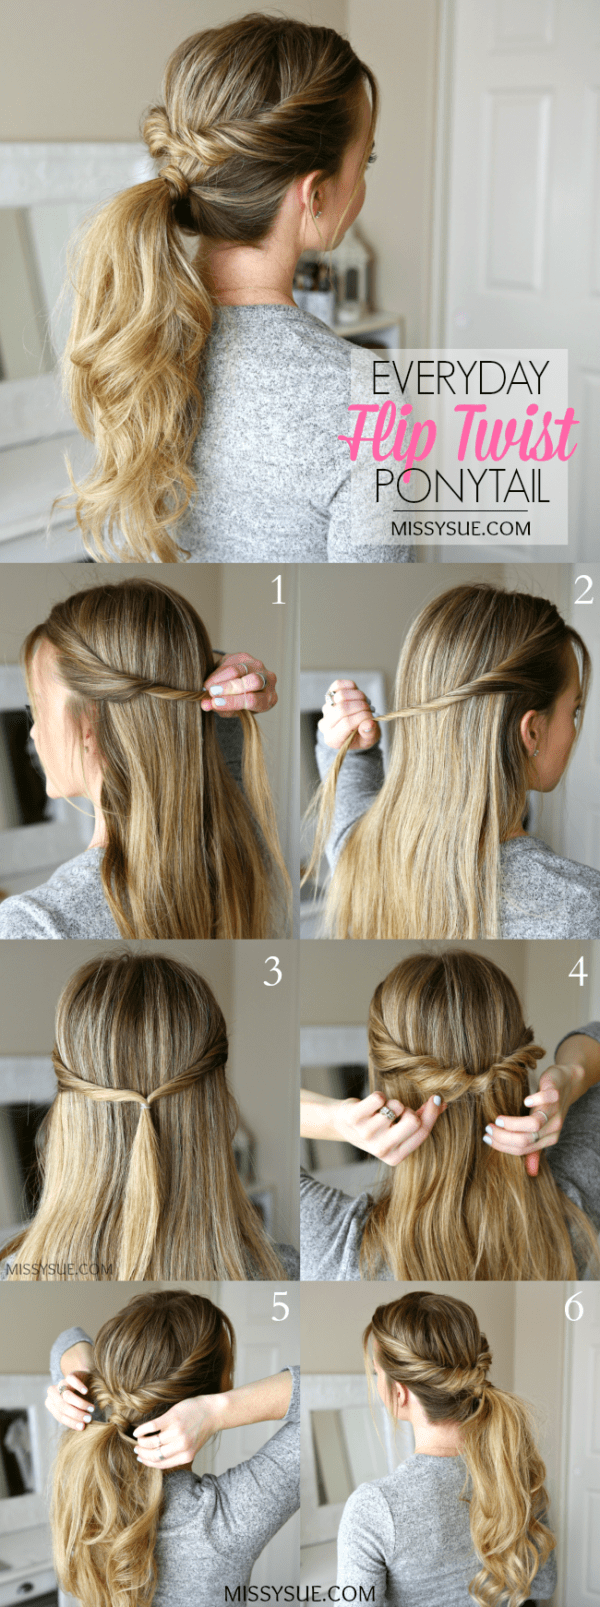 Easy Hairstyles Tutorials For Busy Women That Will Take You Less Than 5 Minutes